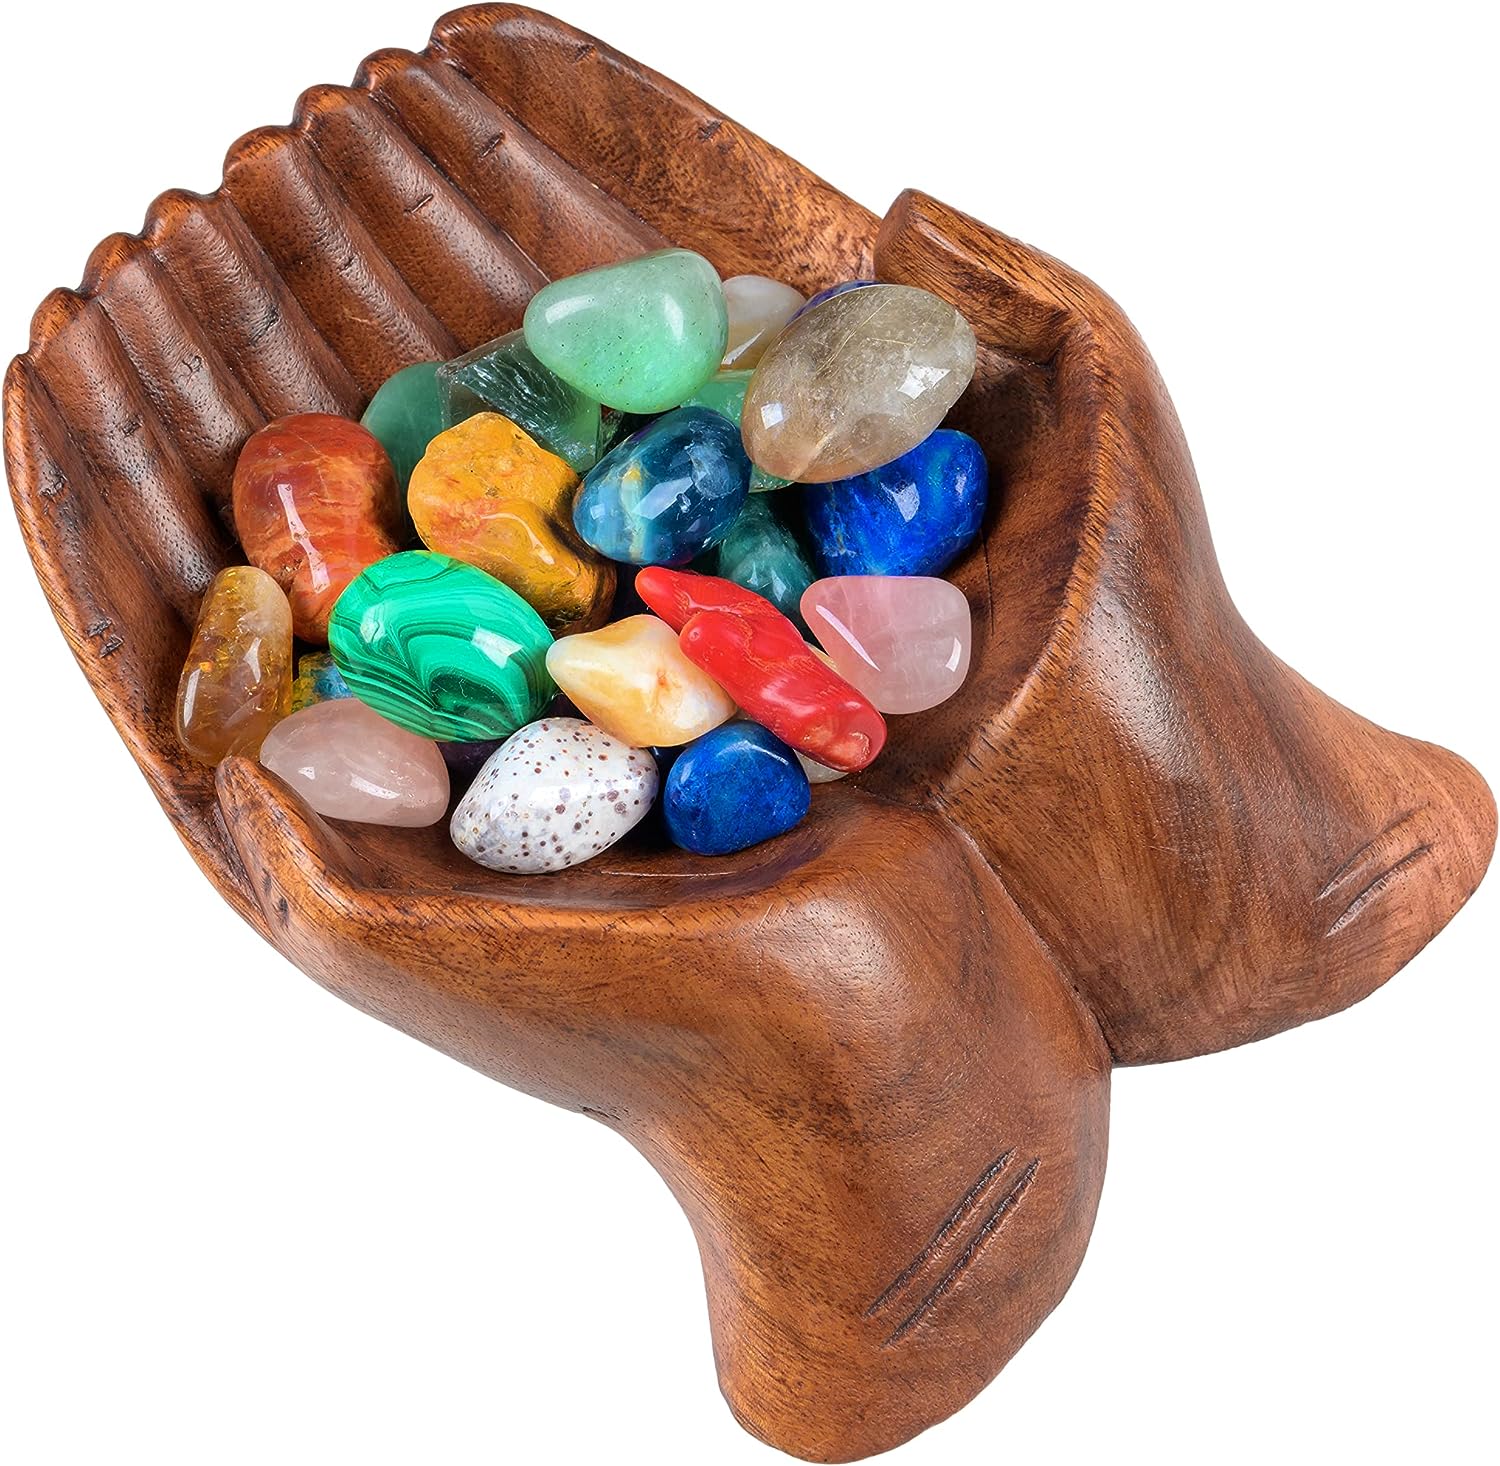 Curawood Carved Hands Offering Bowl - Showcase Your Healing Stones - Crystal Holder for Stones - Key Bowl - Crystal Storage Tray - Decorative Hand Bowl for Rock Display - Crystal Shelf Display Stand